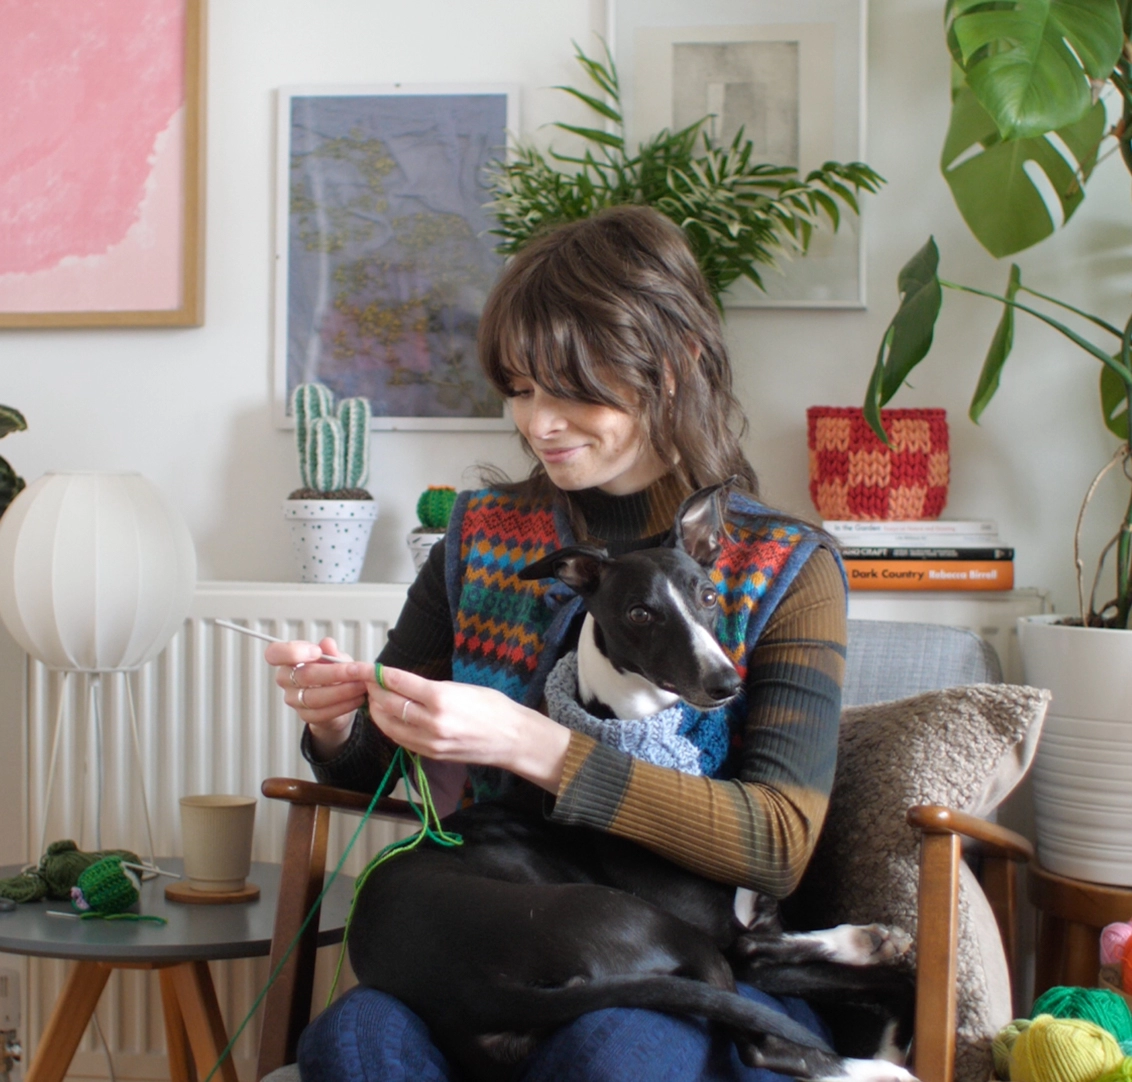 Emily sitting in her colourful studio crocheting a cactus. Her whippet is sitting on her lap.